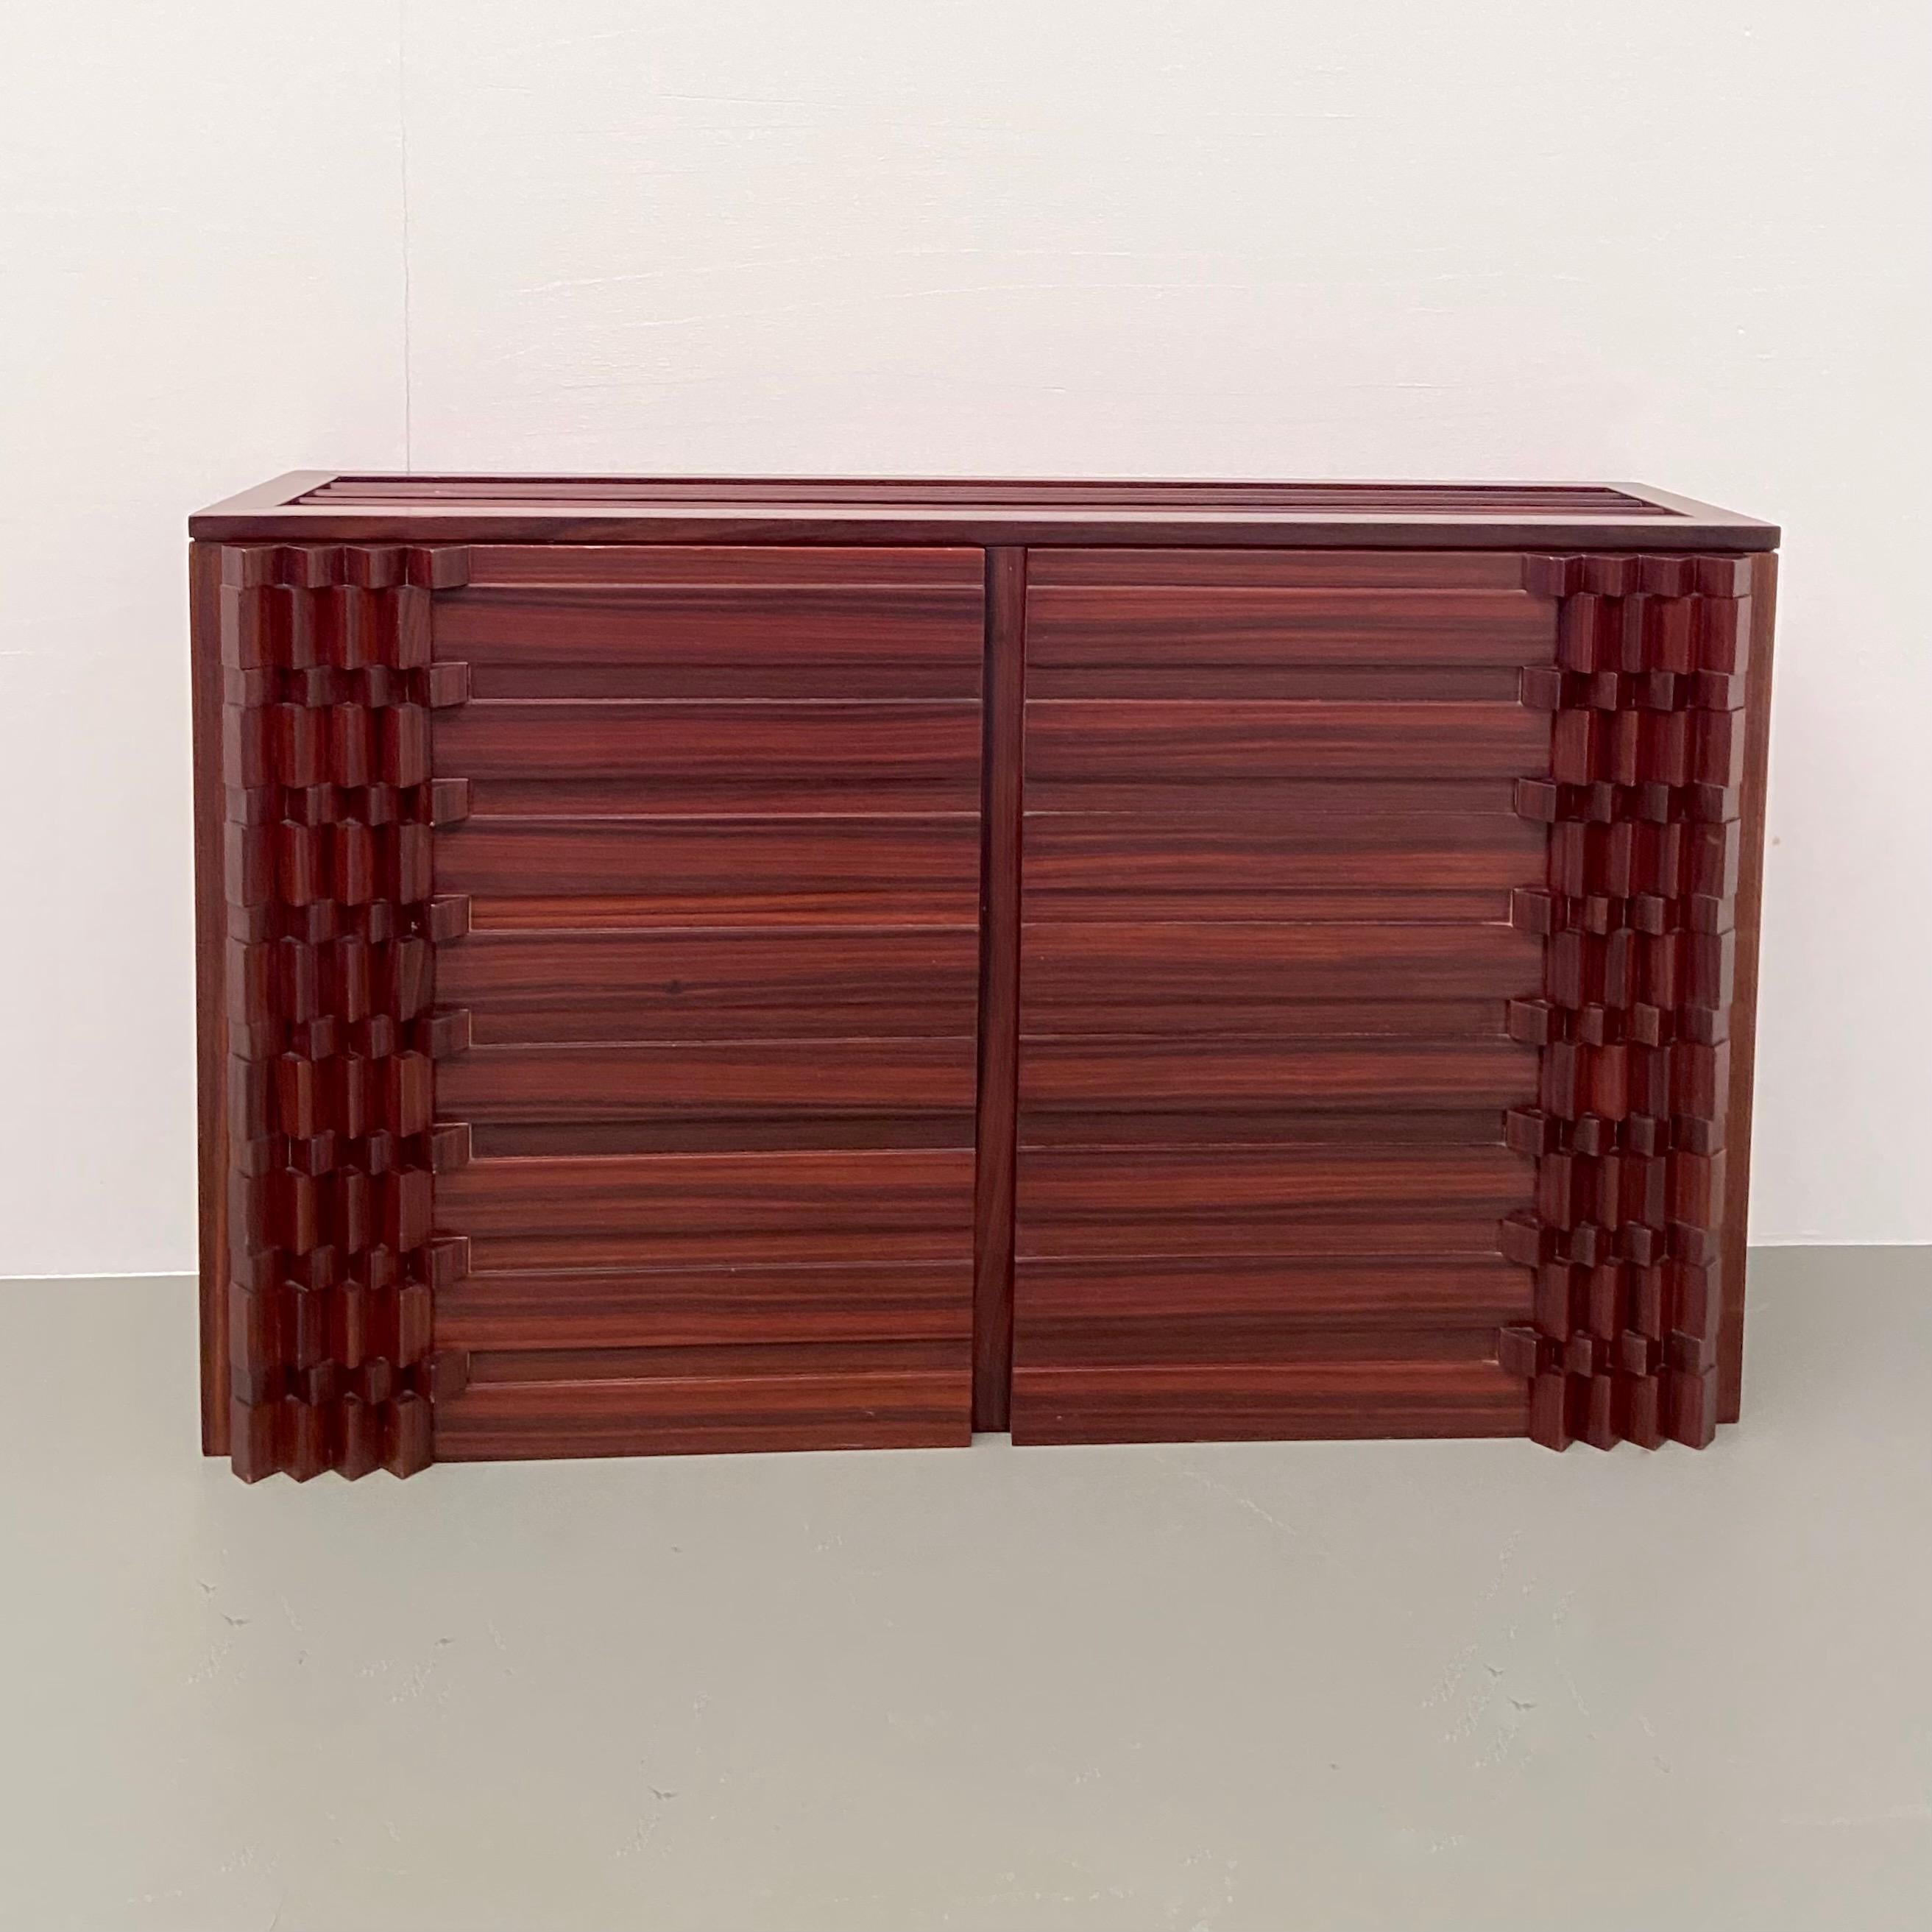 Mid-Century Modern 'Diamante' Cabinet by Luciano Frigerio, Italy, 1968 For Sale